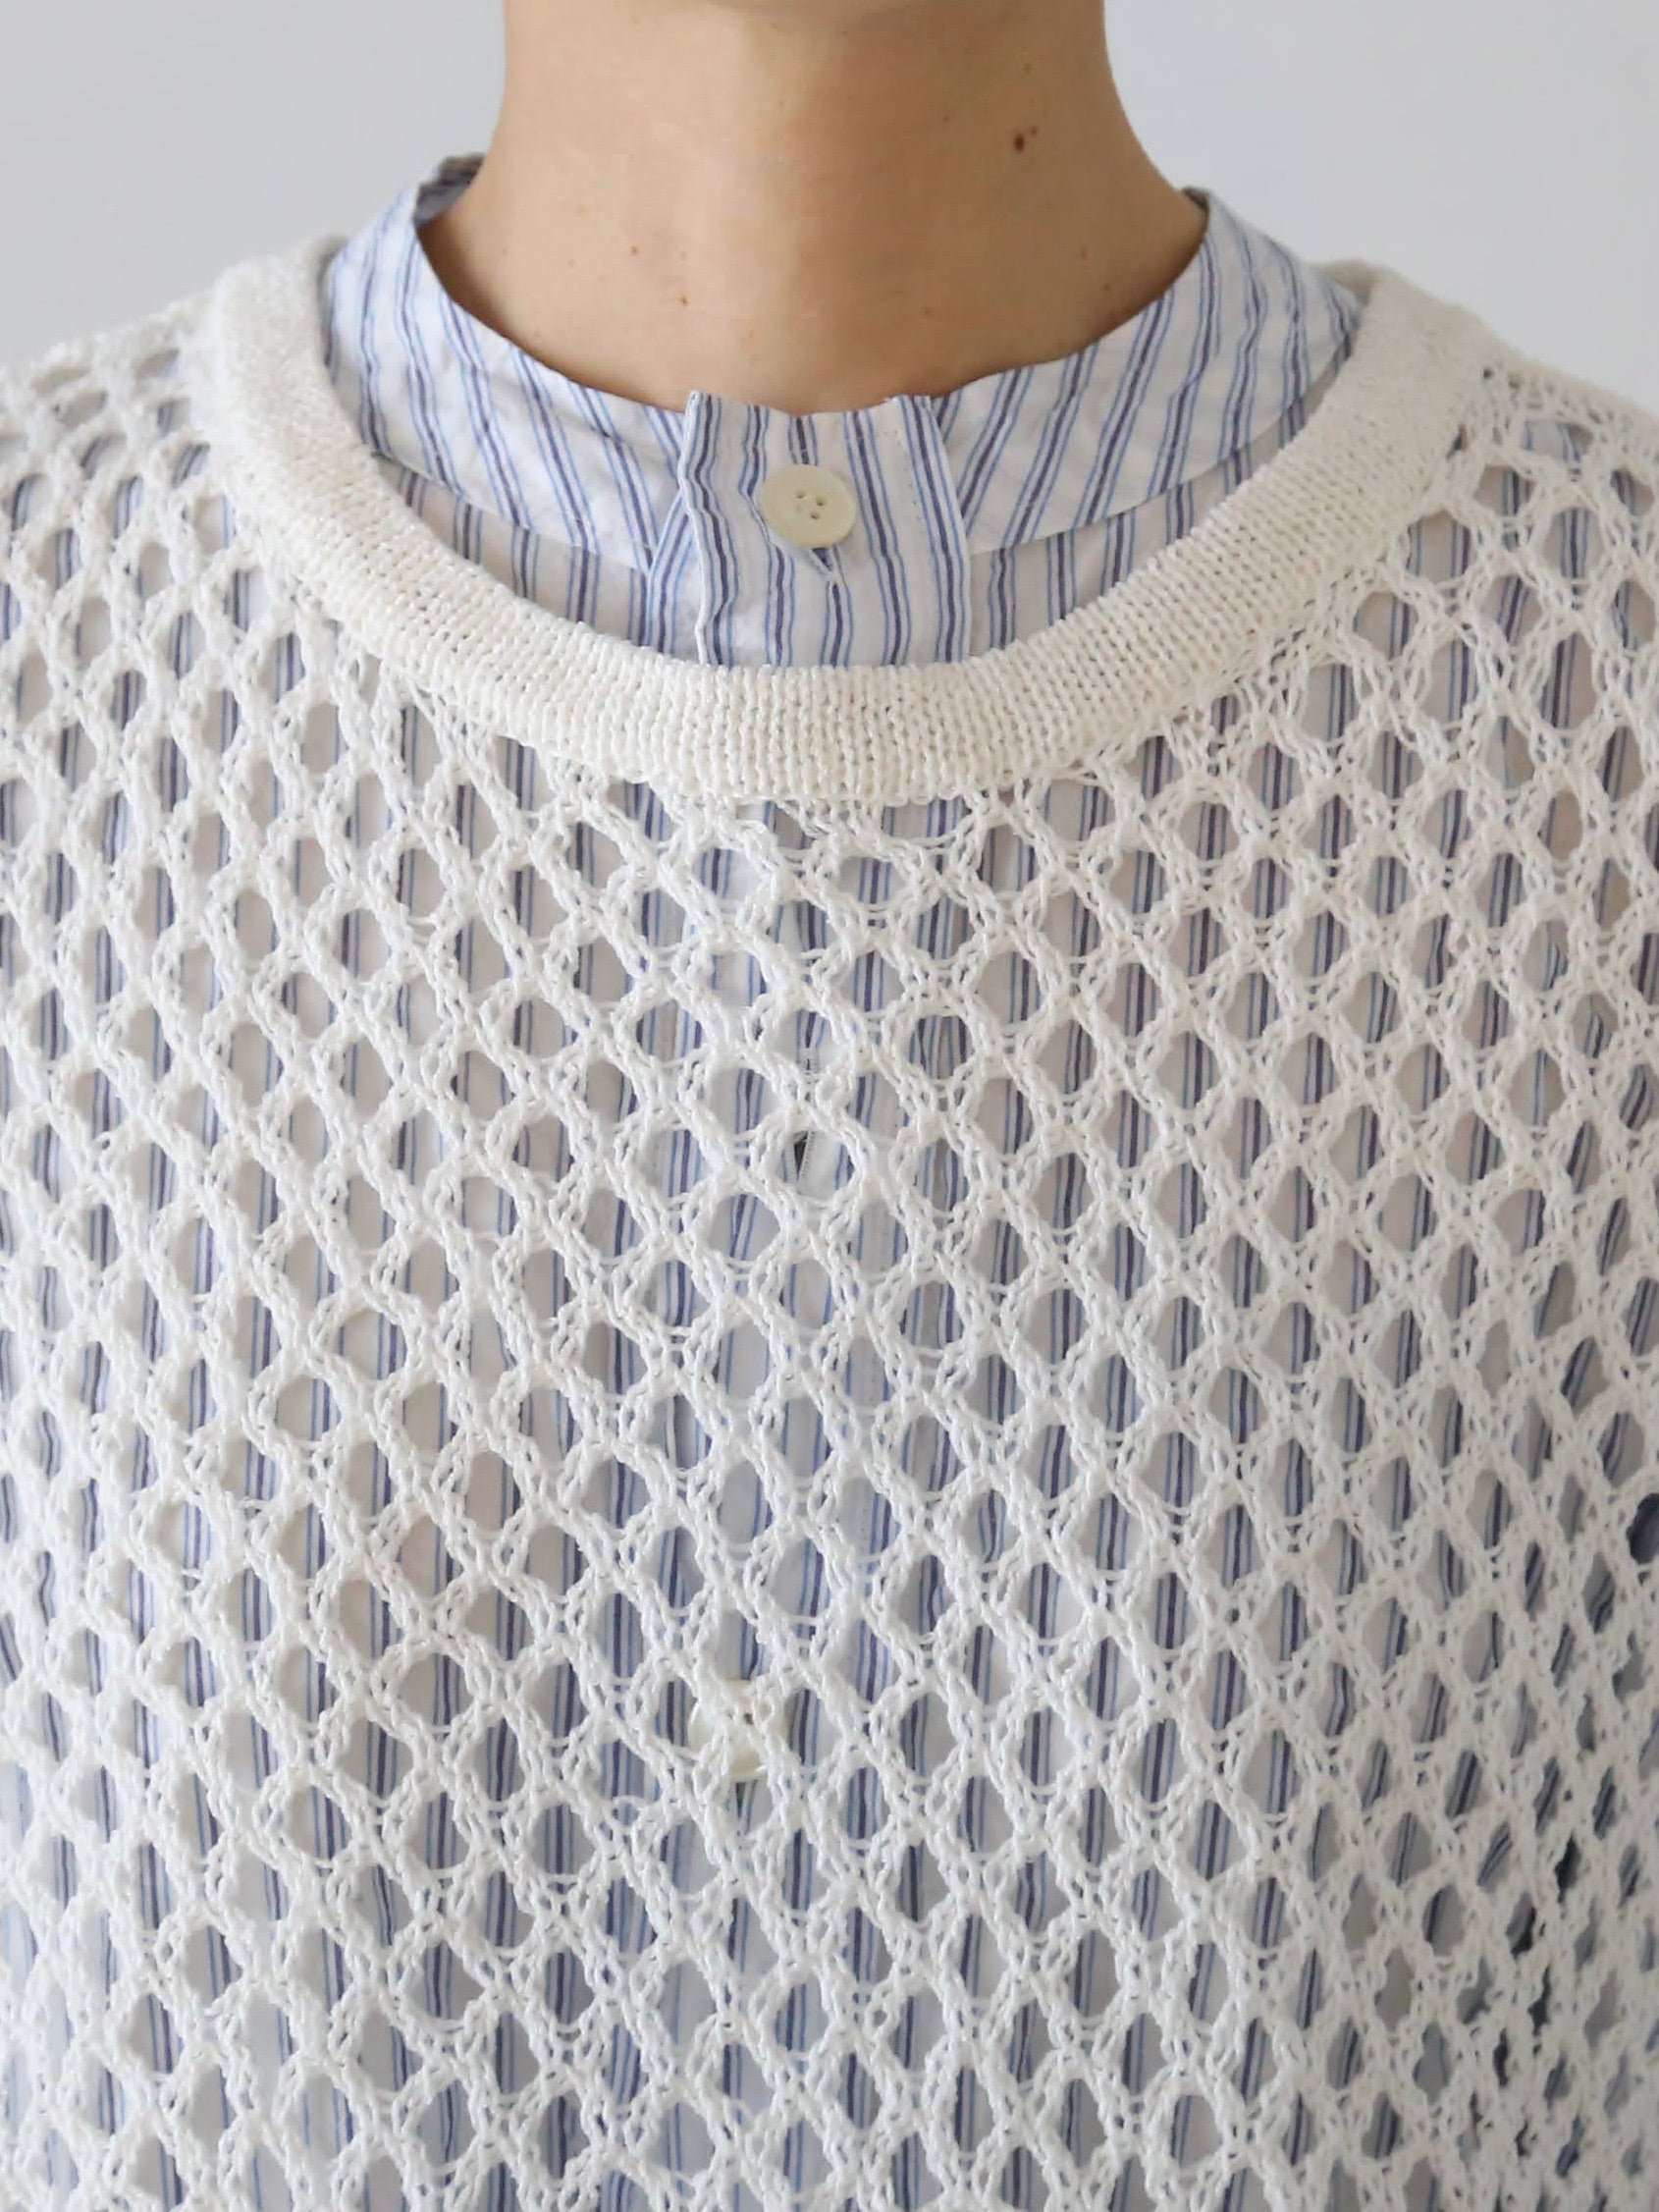 enrica 透かし編みフレンチスリーブ [knit103]